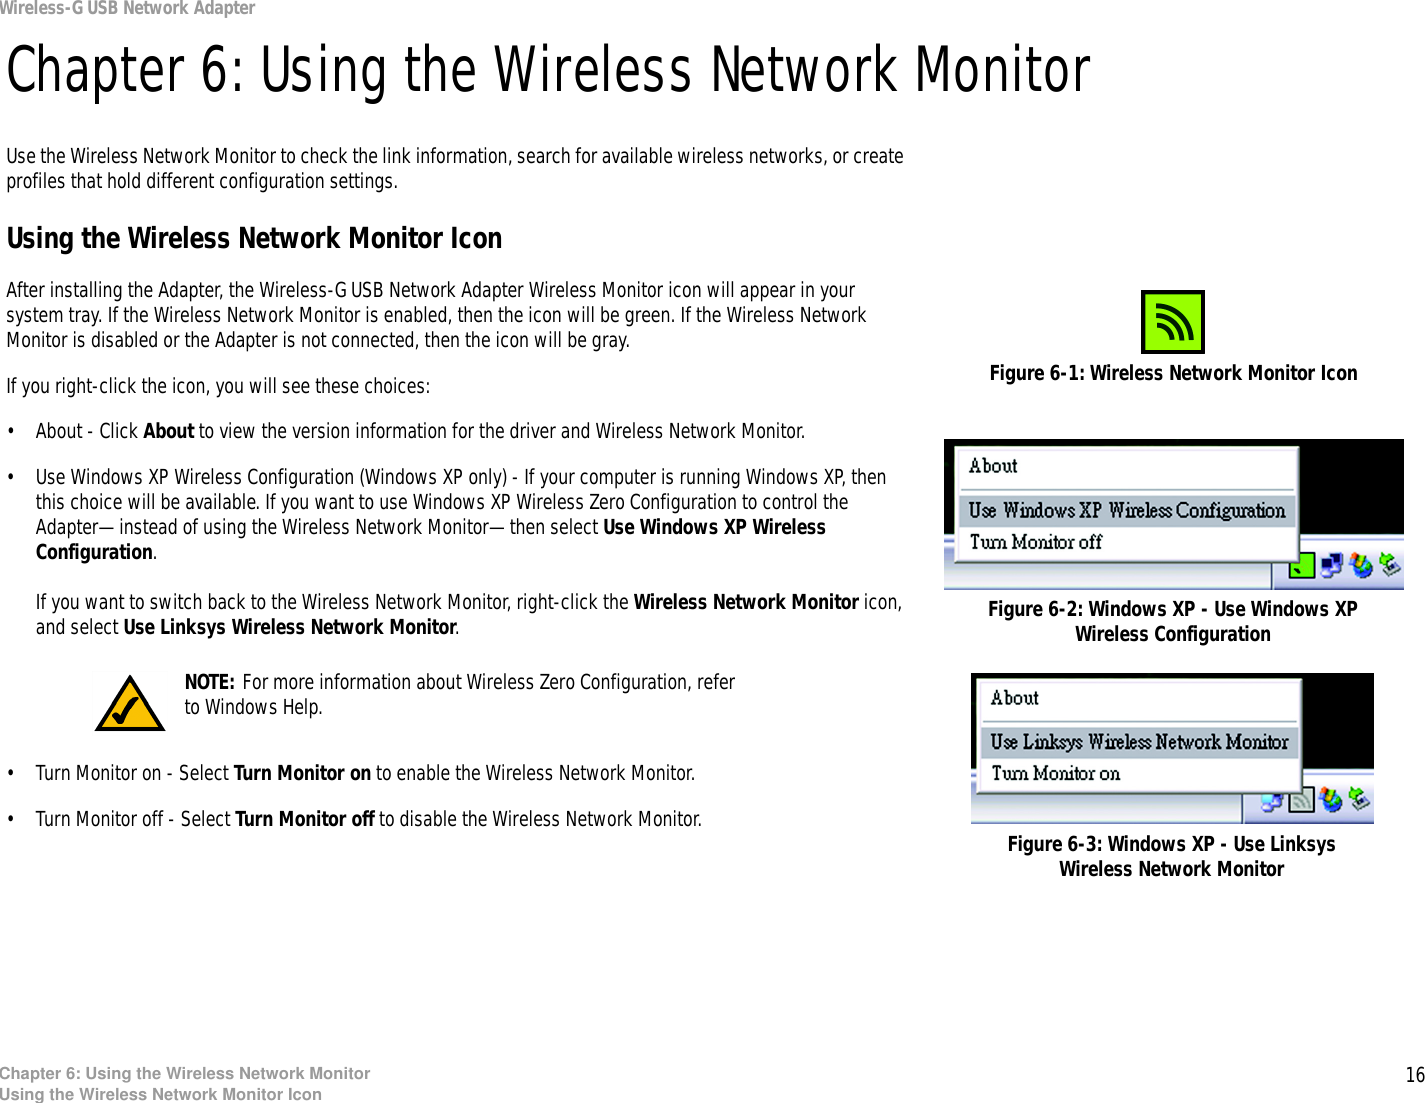 16Chapter 6: Using the Wireless Network MonitorUsing the Wireless Network Monitor IconWireless-G USB Network AdapterChapter 6: Using the Wireless Network MonitorUse the Wireless Network Monitor to check the link information, search for available wireless networks, or create profiles that hold different configuration settings.Using the Wireless Network Monitor IconAfter installing the Adapter, the Wireless-G USB Network Adapter Wireless Monitor icon will appear in your system tray. If the Wireless Network Monitor is enabled, then the icon will be green. If the Wireless Network Monitor is disabled or the Adapter is not connected, then the icon will be gray.If you right-click the icon, you will see these choices:• About - Click About to view the version information for the driver and Wireless Network Monitor.• Use Windows XP Wireless Configuration (Windows XP only) - If your computer is running Windows XP, then this choice will be available. If you want to use Windows XP Wireless Zero Configuration to control the Adapter—instead of using the Wireless Network Monitor—then select Use Windows XP Wireless Configuration.If you want to switch back to the Wireless Network Monitor, right-click the Wireless Network Monitor icon, and select Use Linksys Wireless Network Monitor.• Turn Monitor on - Select Turn Monitor on to enable the Wireless Network Monitor.• Turn Monitor off - Select Turn Monitor off to disable the Wireless Network Monitor.Figure 6-1: Wireless Network Monitor IconNOTE: For more information about Wireless Zero Configuration, refer to Windows Help.Figure 6-2: Windows XP - Use Windows XP Wireless ConfigurationFigure 6-3: Windows XP - Use Linksys Wireless Network Monitor